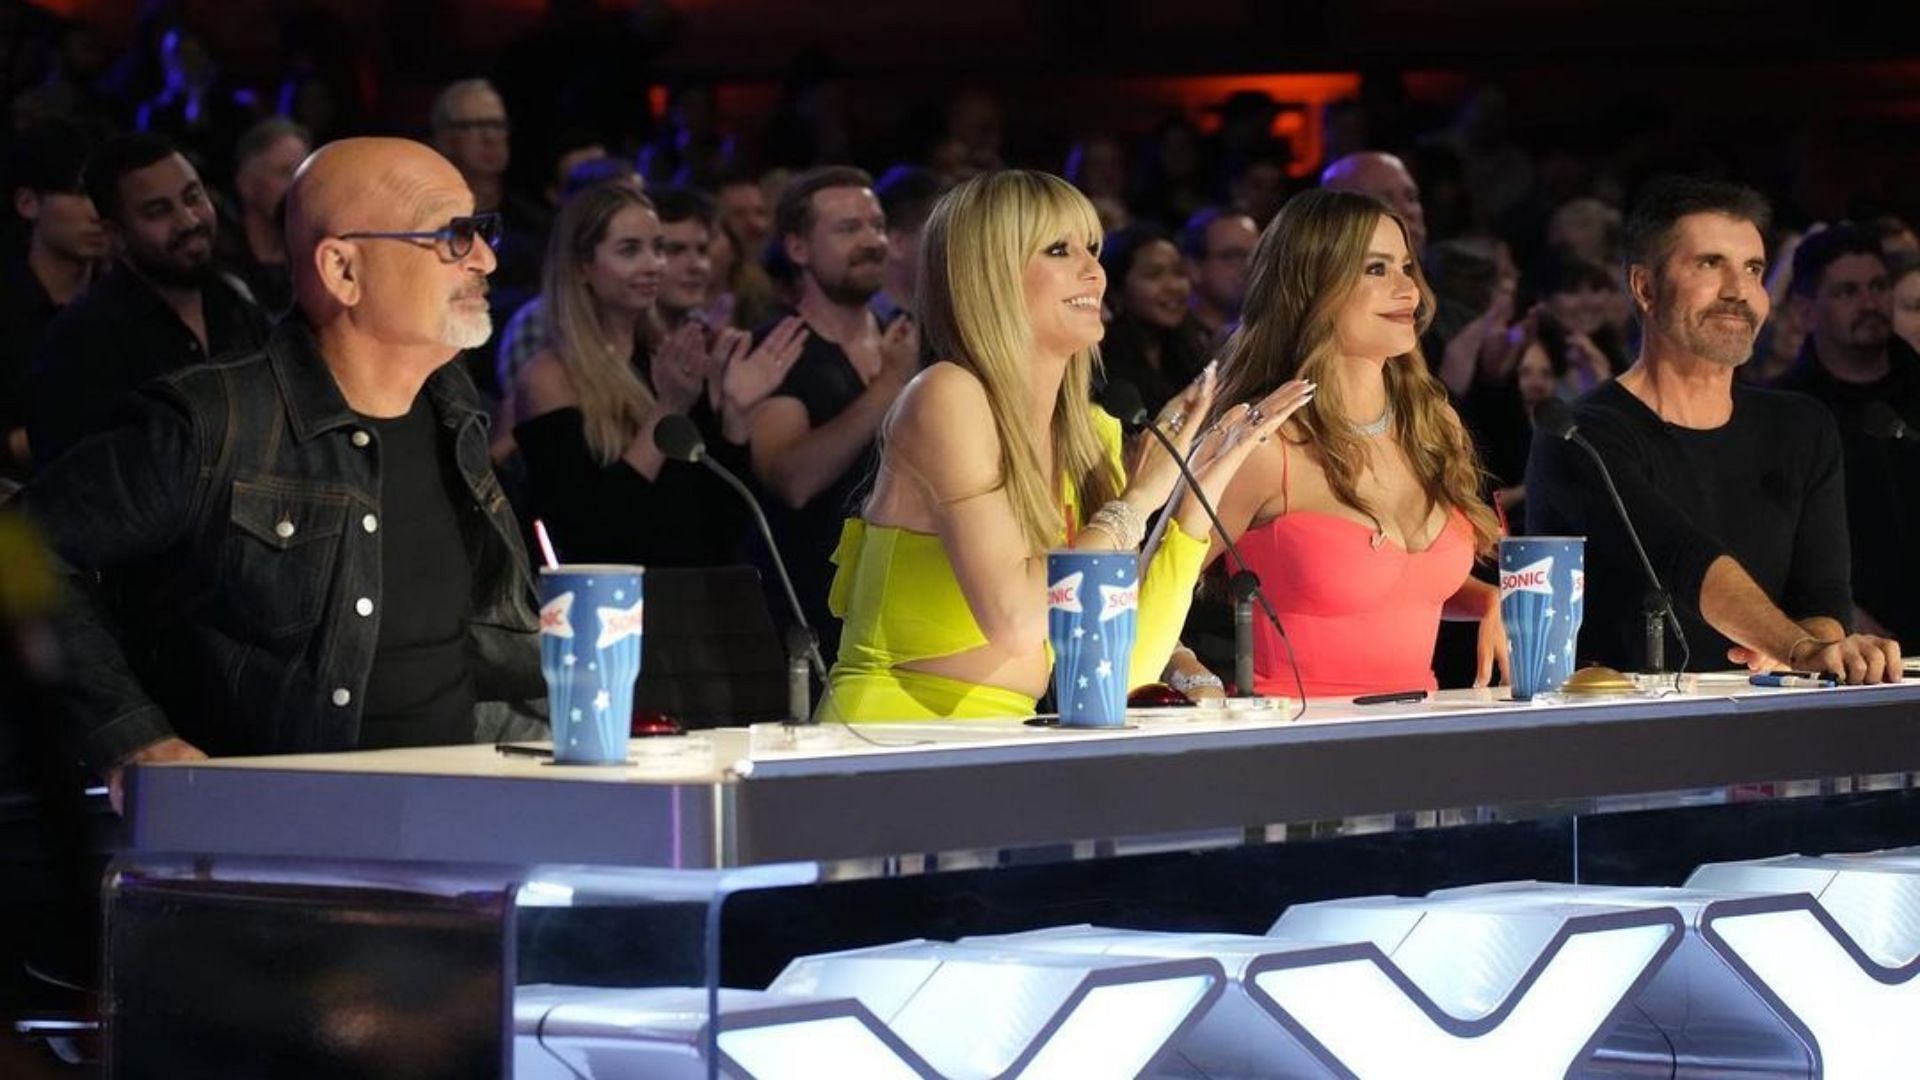 AGT season 18 airs a brand new episode this Tuesday